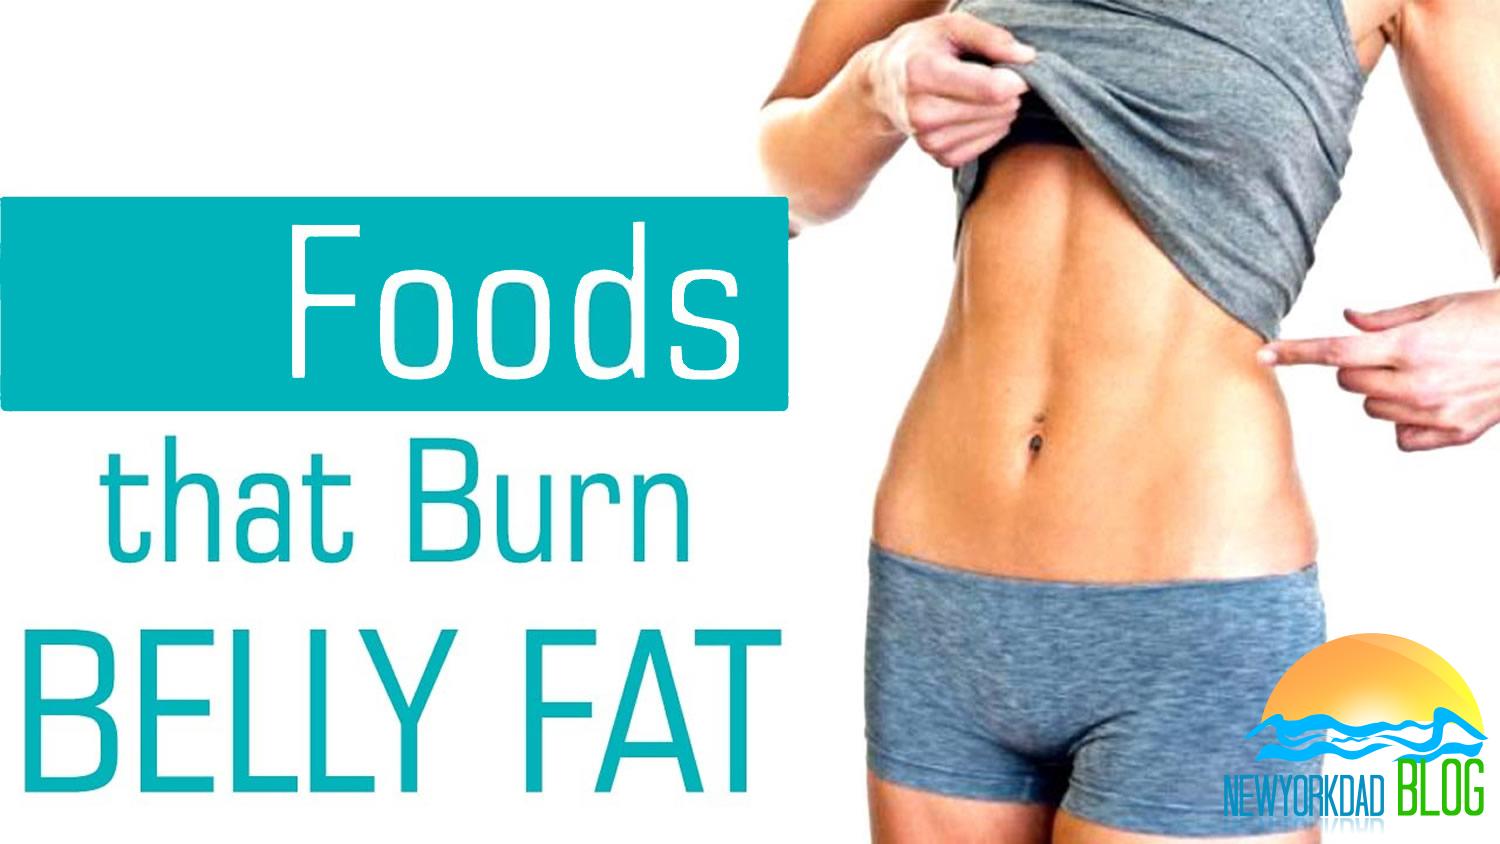 What Foods Help Burn Belly Fat?